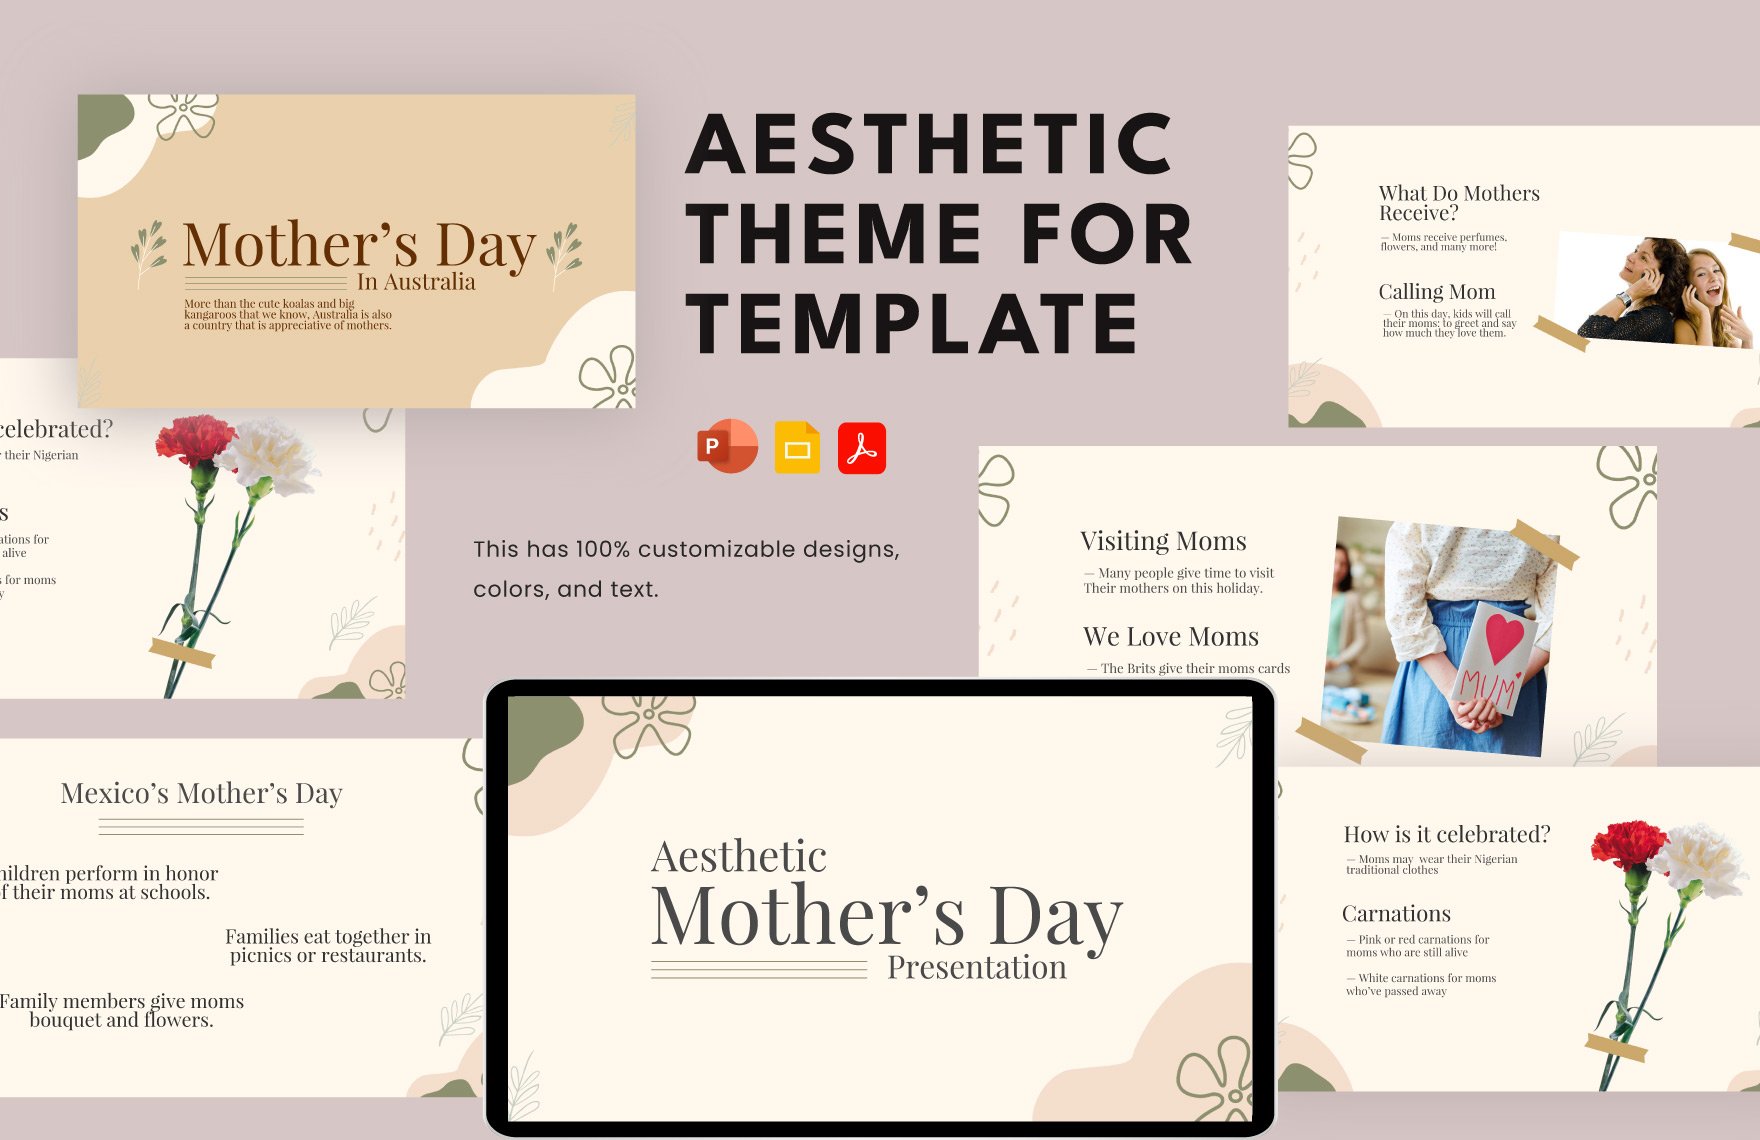 Aesthetic Theme for Template